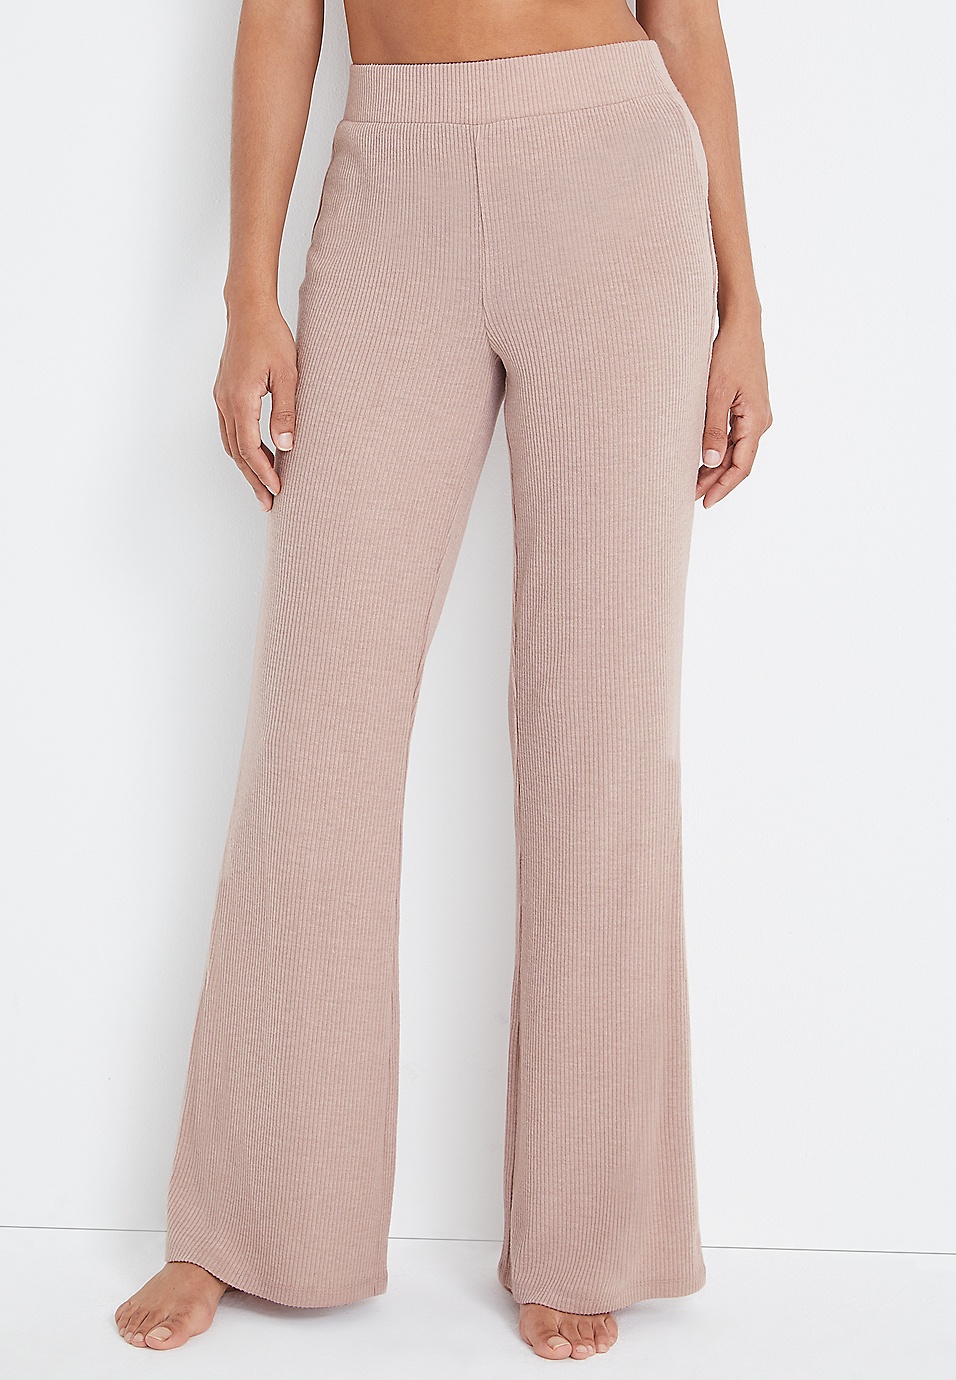 Cozy Evening Ribbed Lounge Pants- Ice Blue – Vogue Society